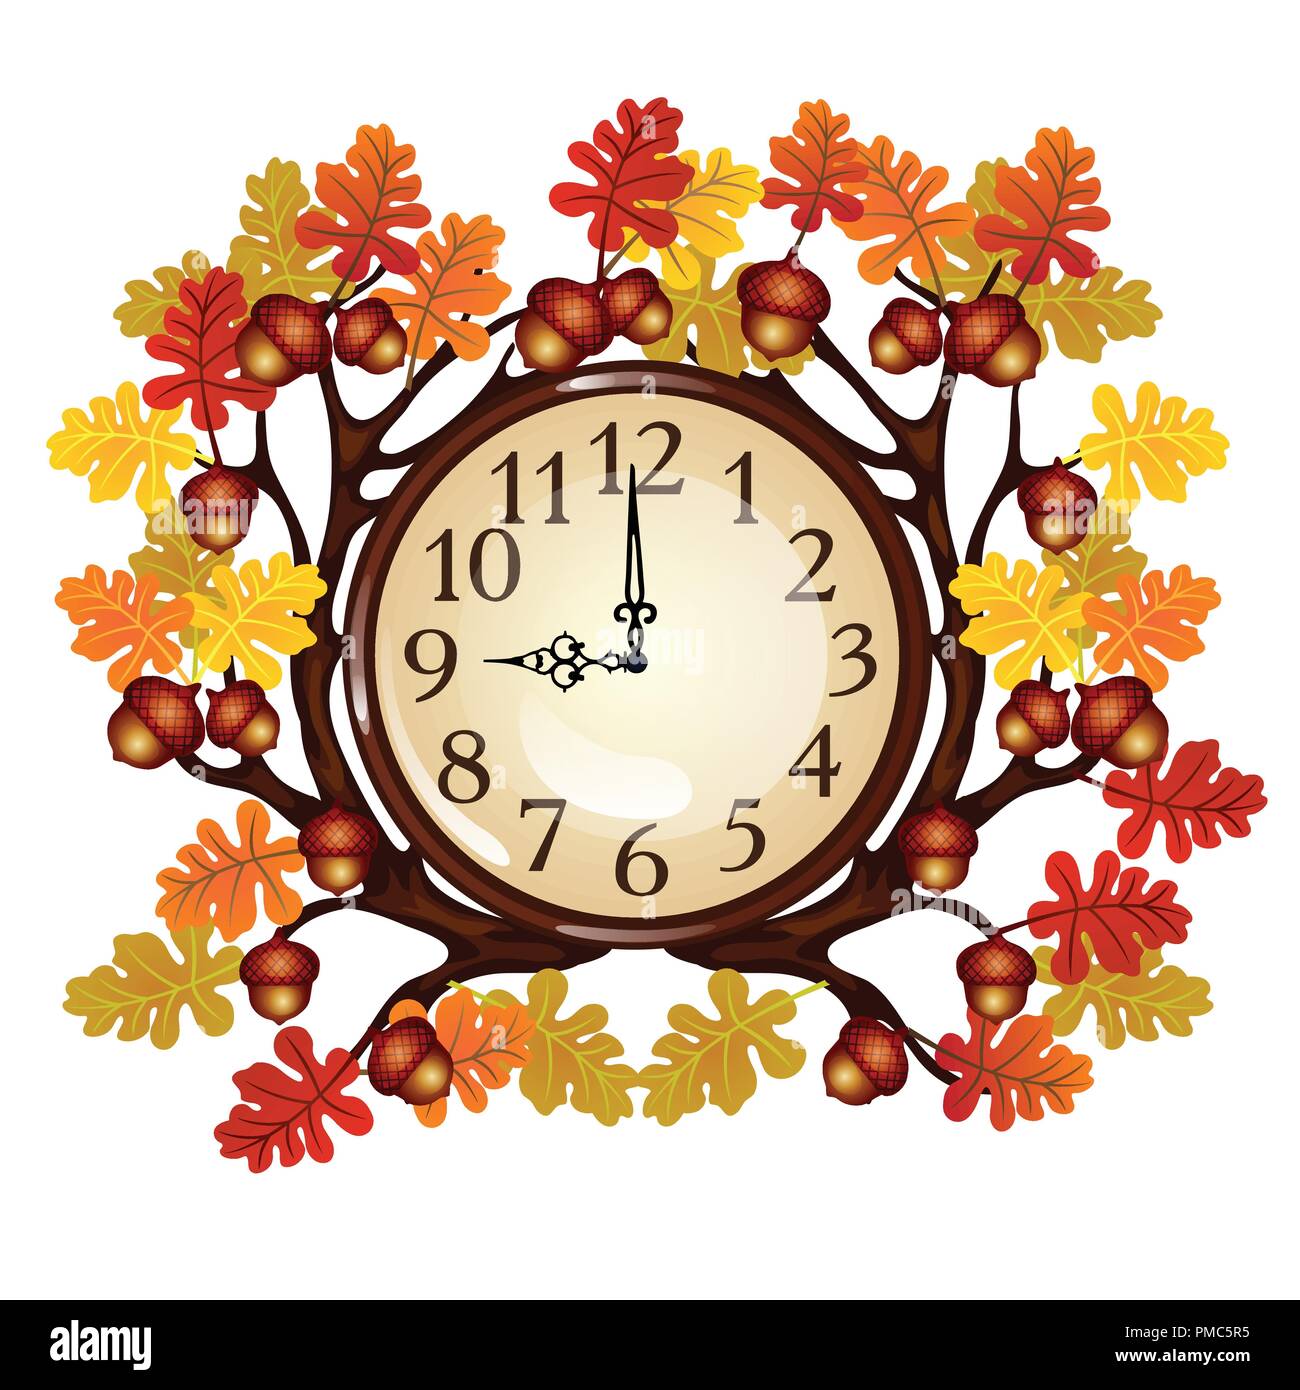 Vintage wall clock with ornate frame of tree branches with autumn oak leaves and acorns. Element of interior design on theme of golden autumn isolated on white background. Vector cartoon close-up. Stock Vector